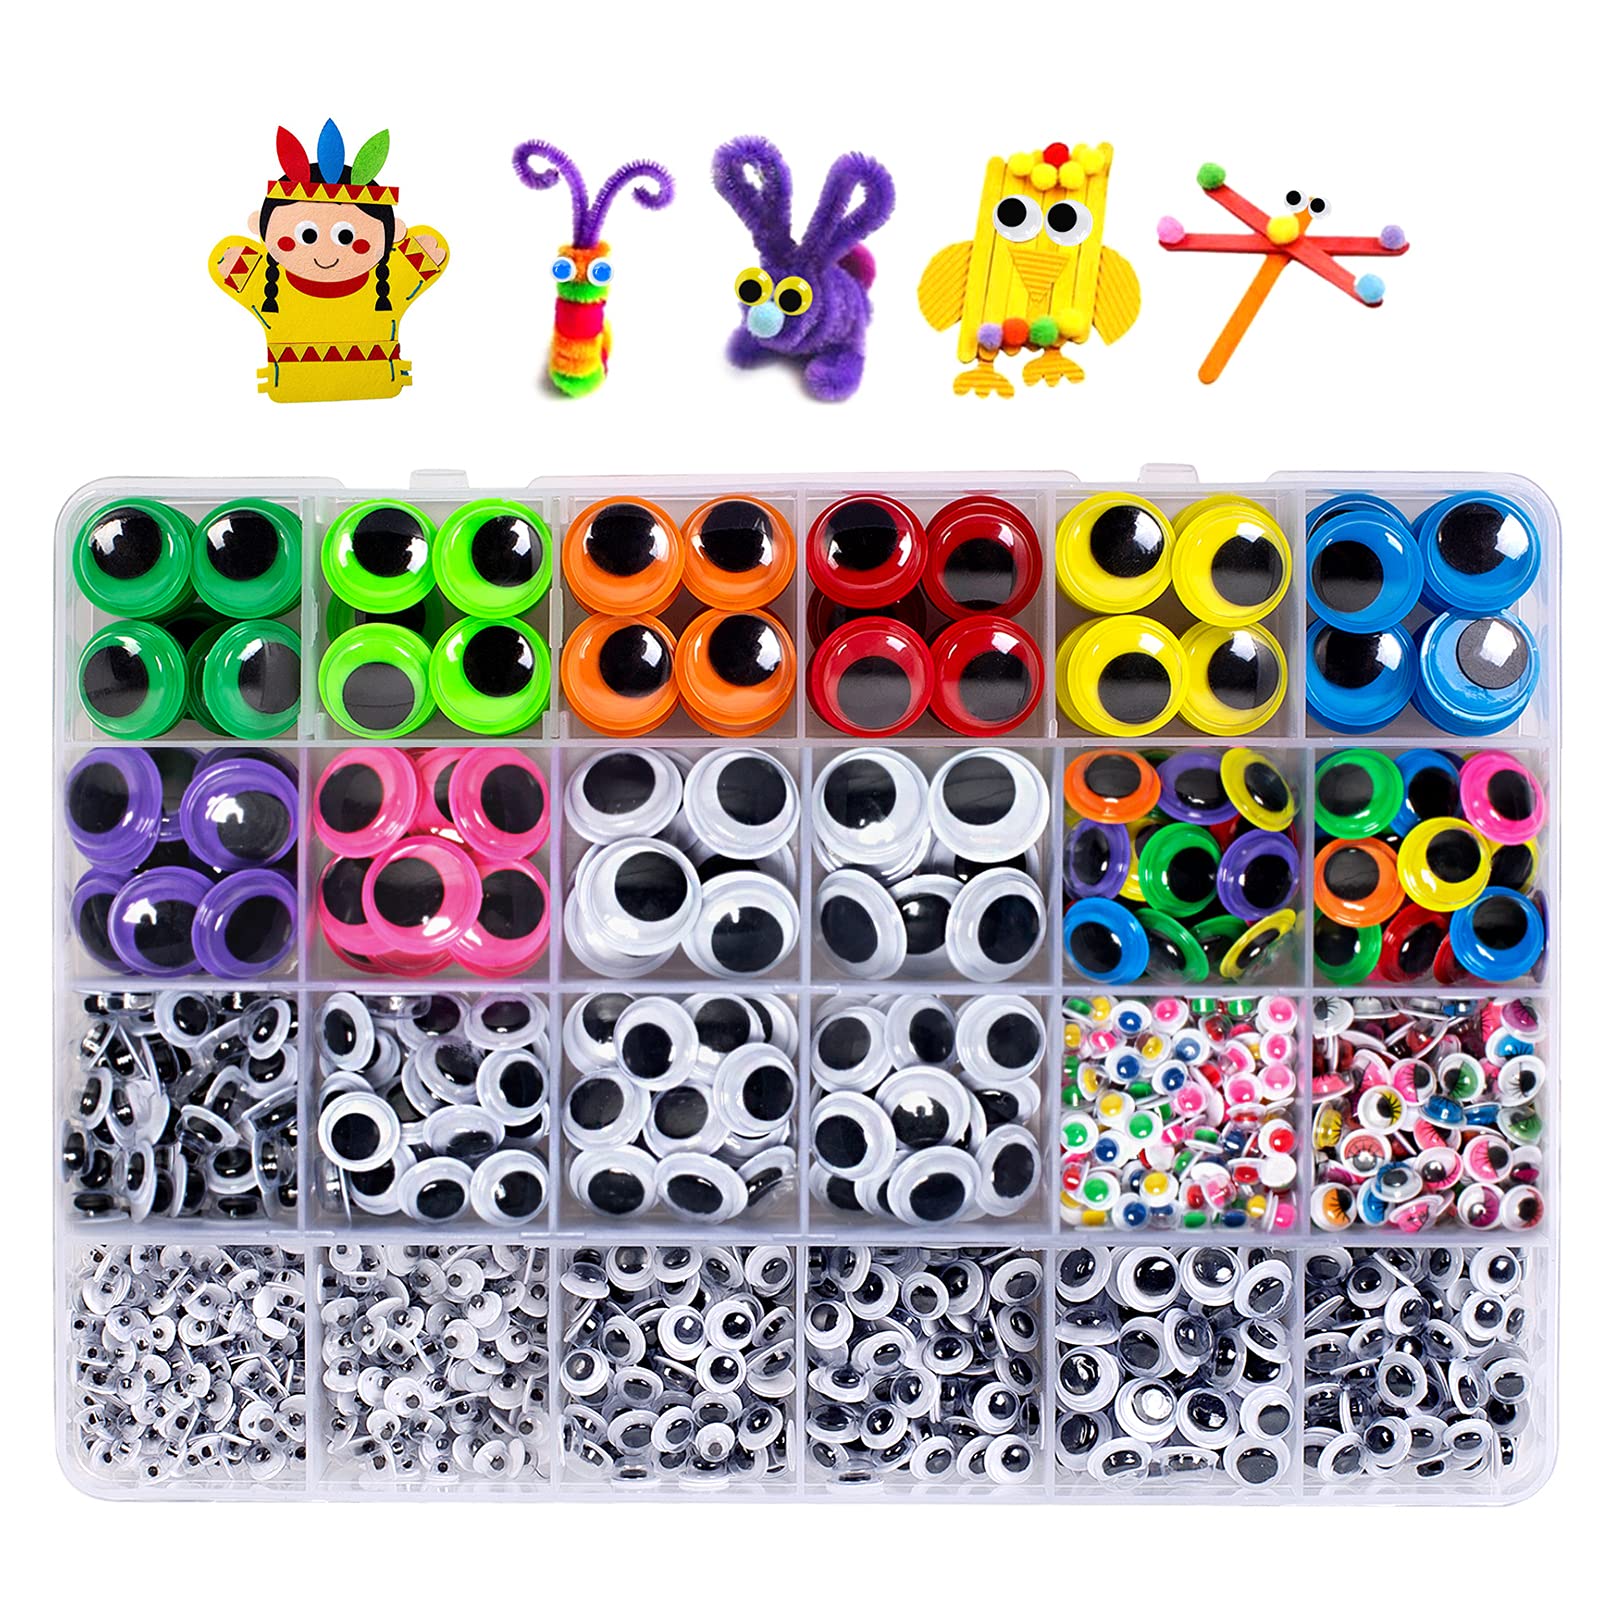 GCVOPTON 1680pcs Googly Eyes Self Adhesive, Google Eyes for Crafts, Multi Colored Assorted Sizes Wiggle Eyes for DIY, Googly Eyes Stickers for Art